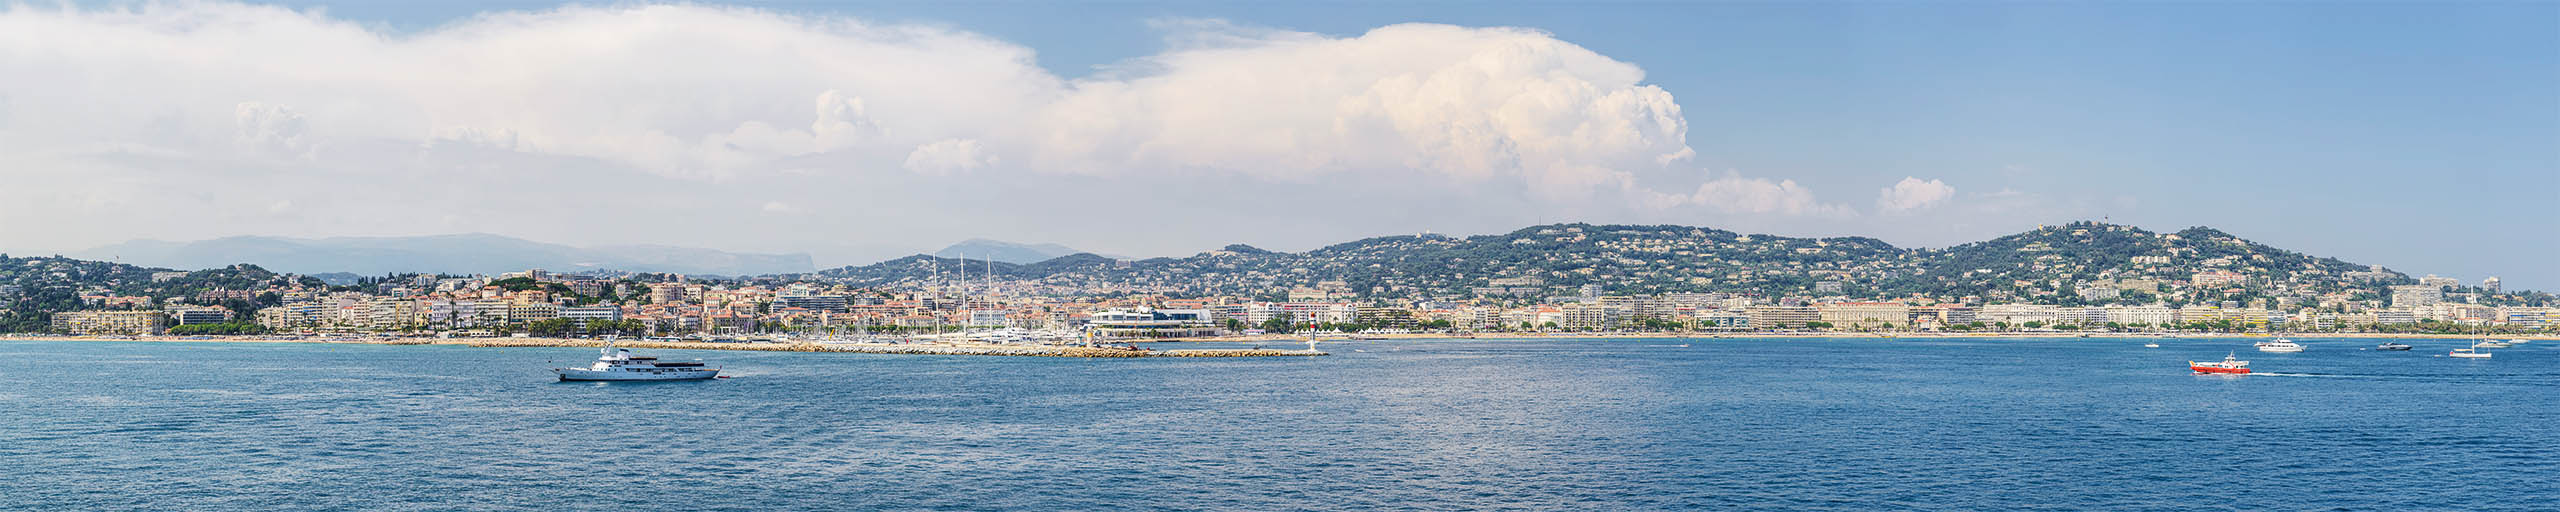 Cannes - Panorama 7_5-1_2560